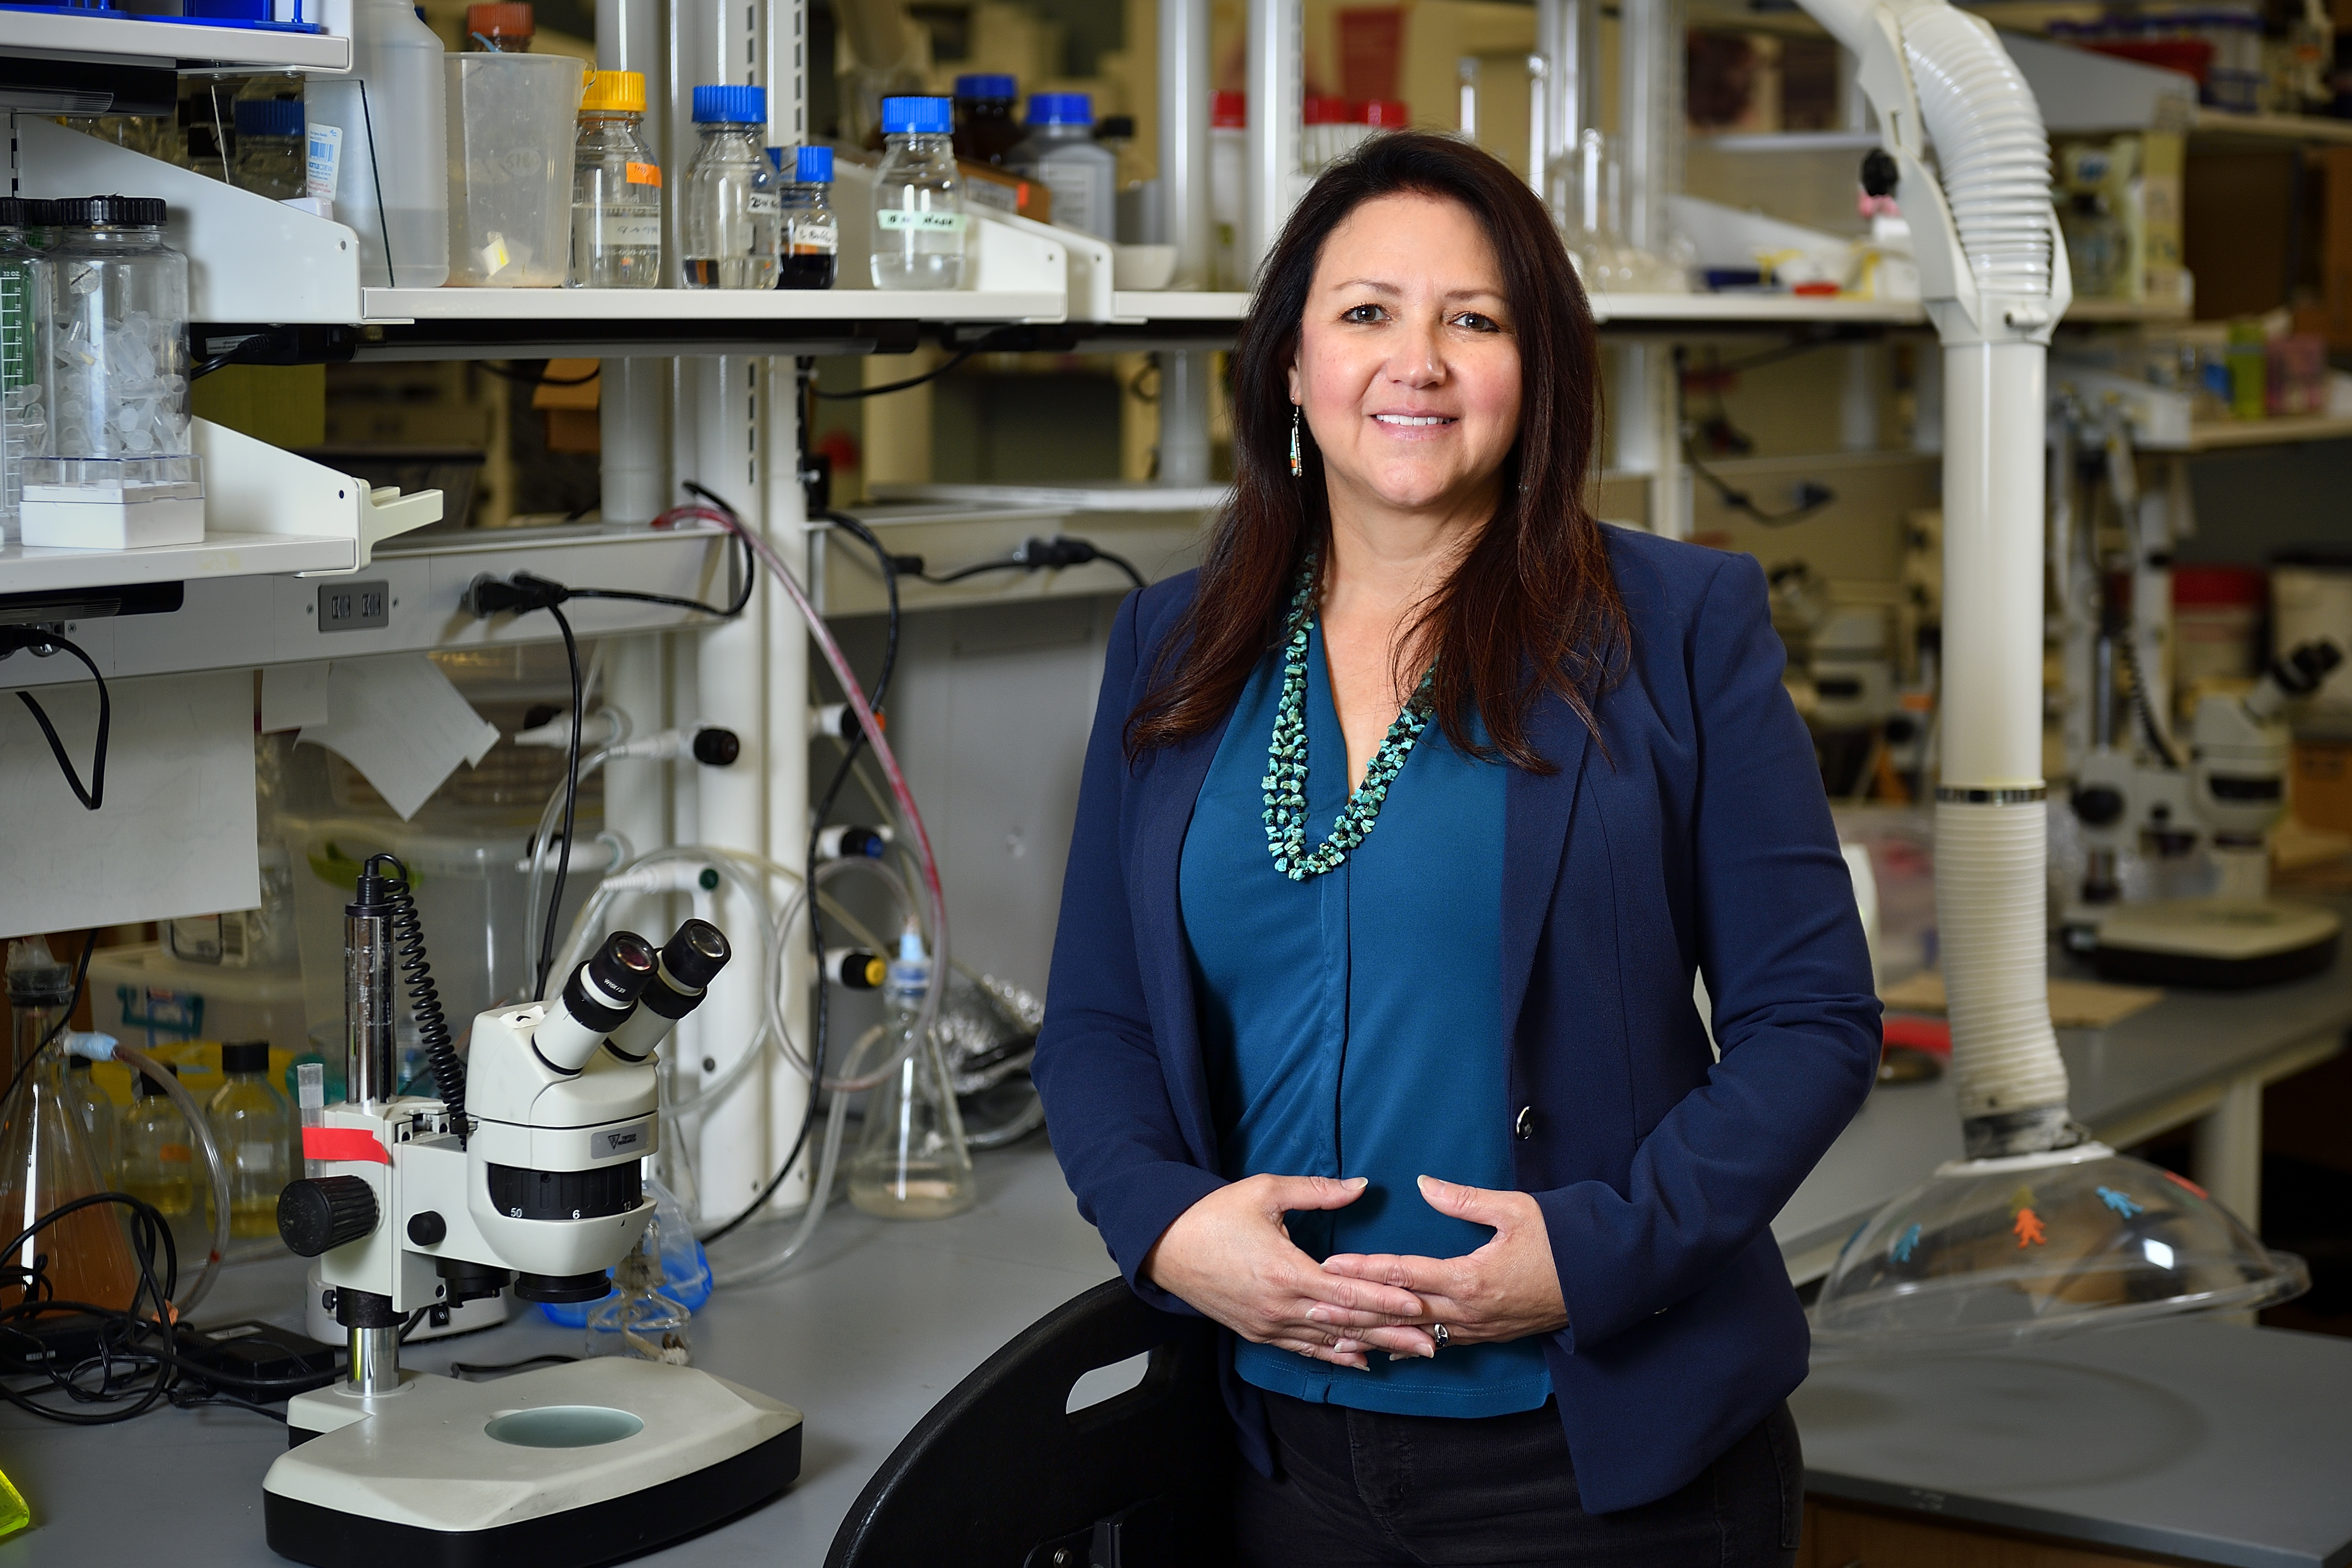 Pamela Padilla’s appointment as College of Science dean will begin June 16